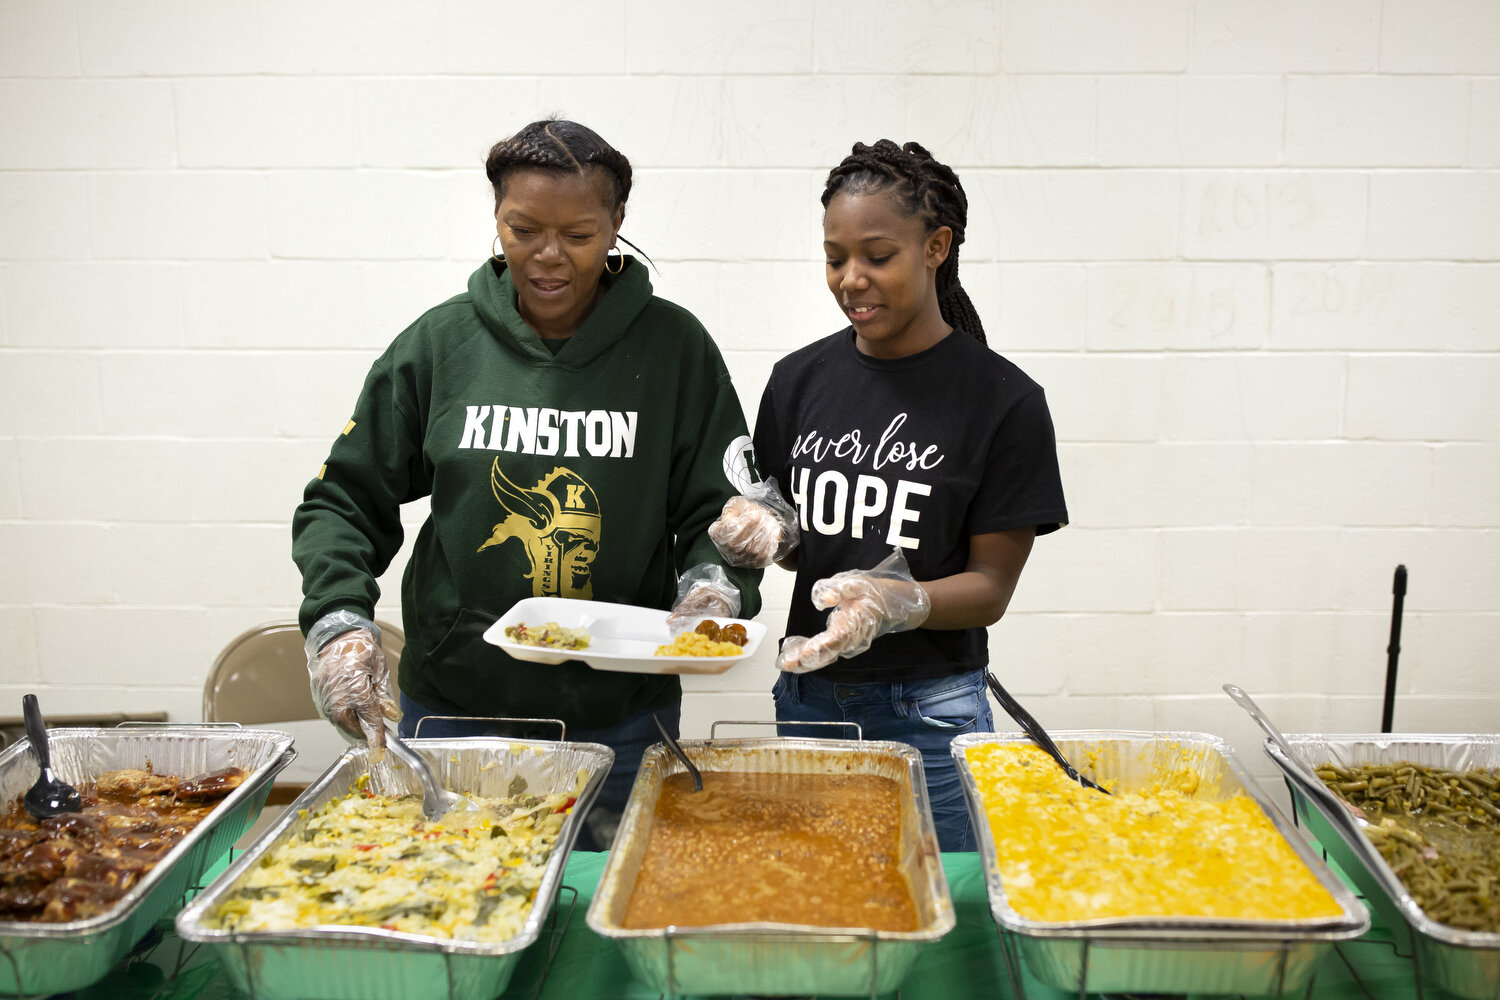  Lori Carmon, left, whose daughter Michyla Dove plays on the team, and team assistant KJay Johnson, right, serve food during the jamboree games hosted by Kinston High School. Carmon woke up at one a.m. that morning to start cooking all of the food. S